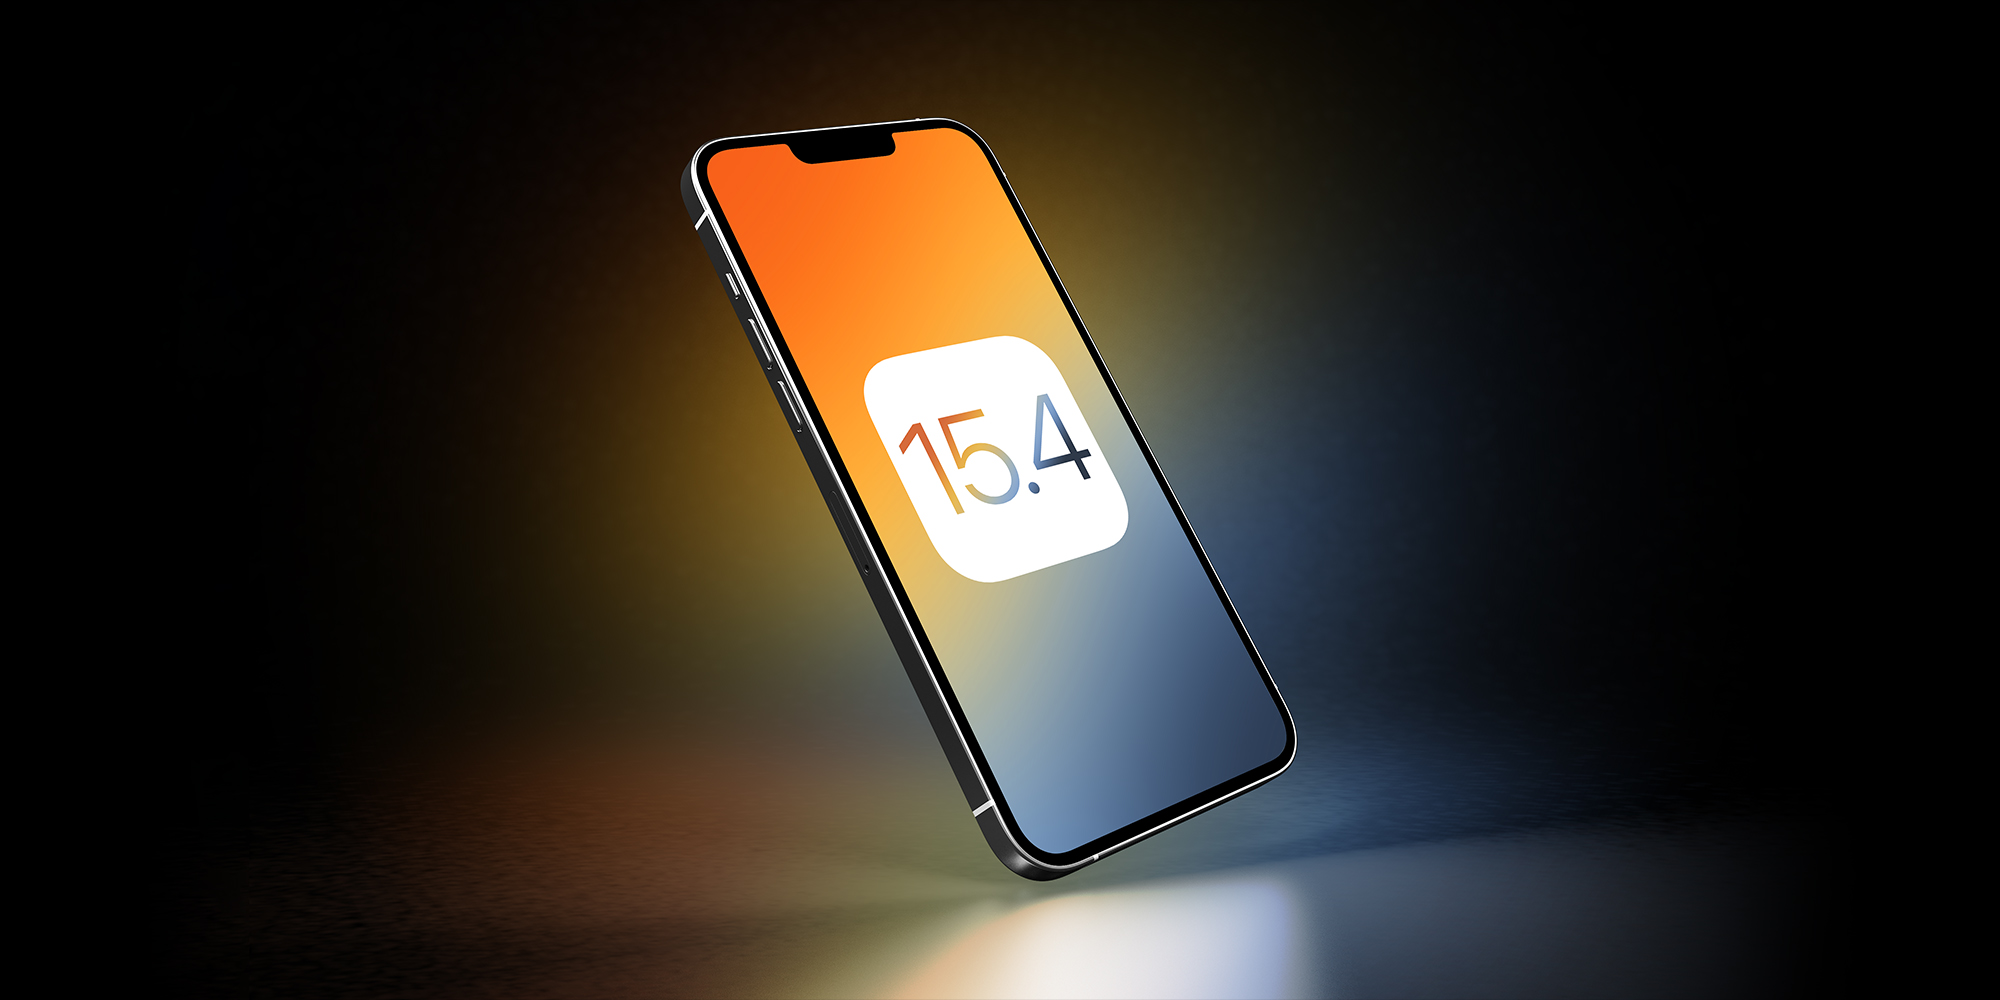 iOS 15.4 beta 2 now rolling out to developers with new Face ID features and  more - 9to5Mac